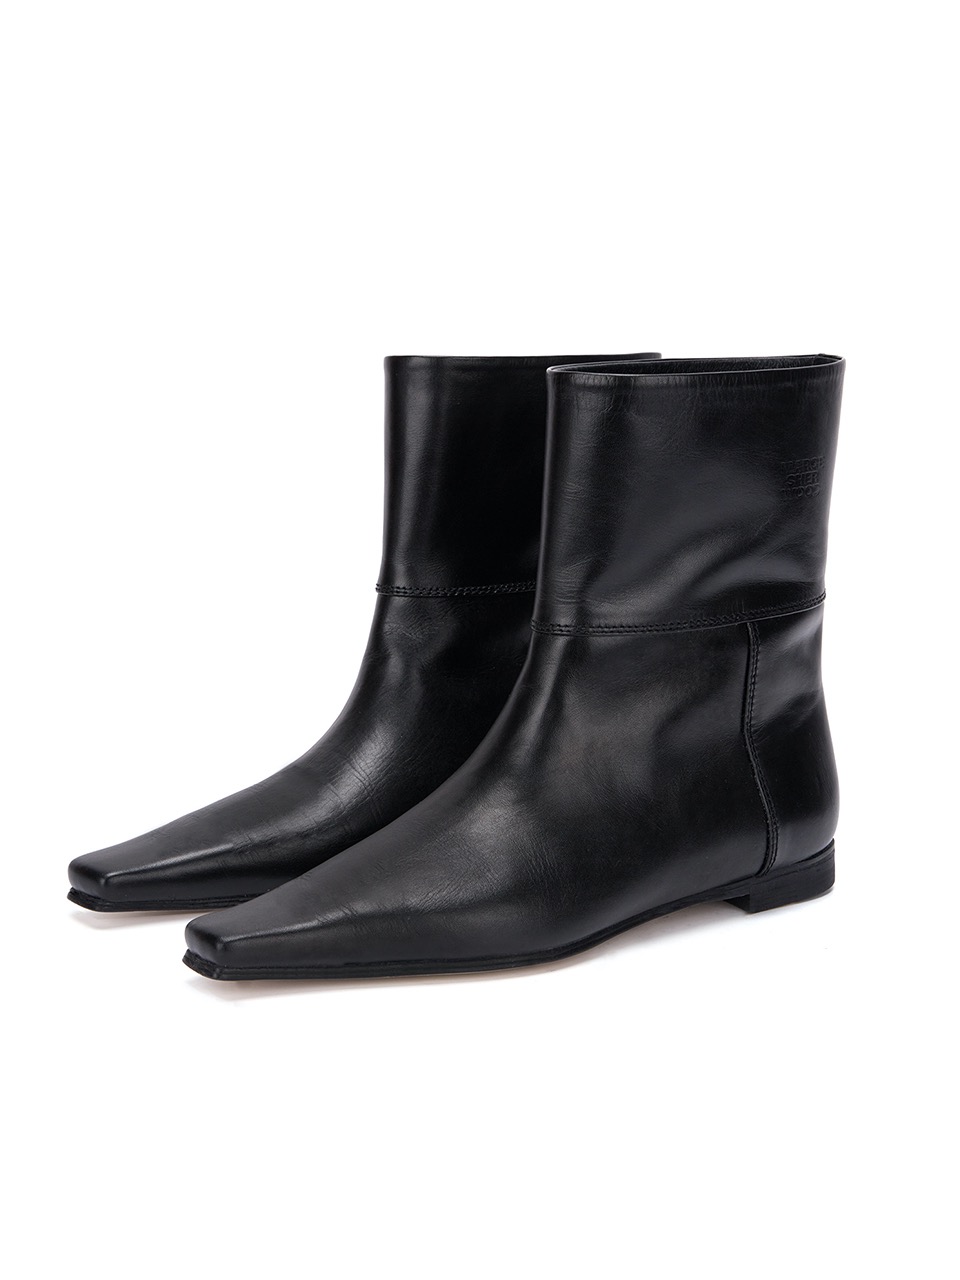 POINTED TOE ANKLE BOOTS_black plain